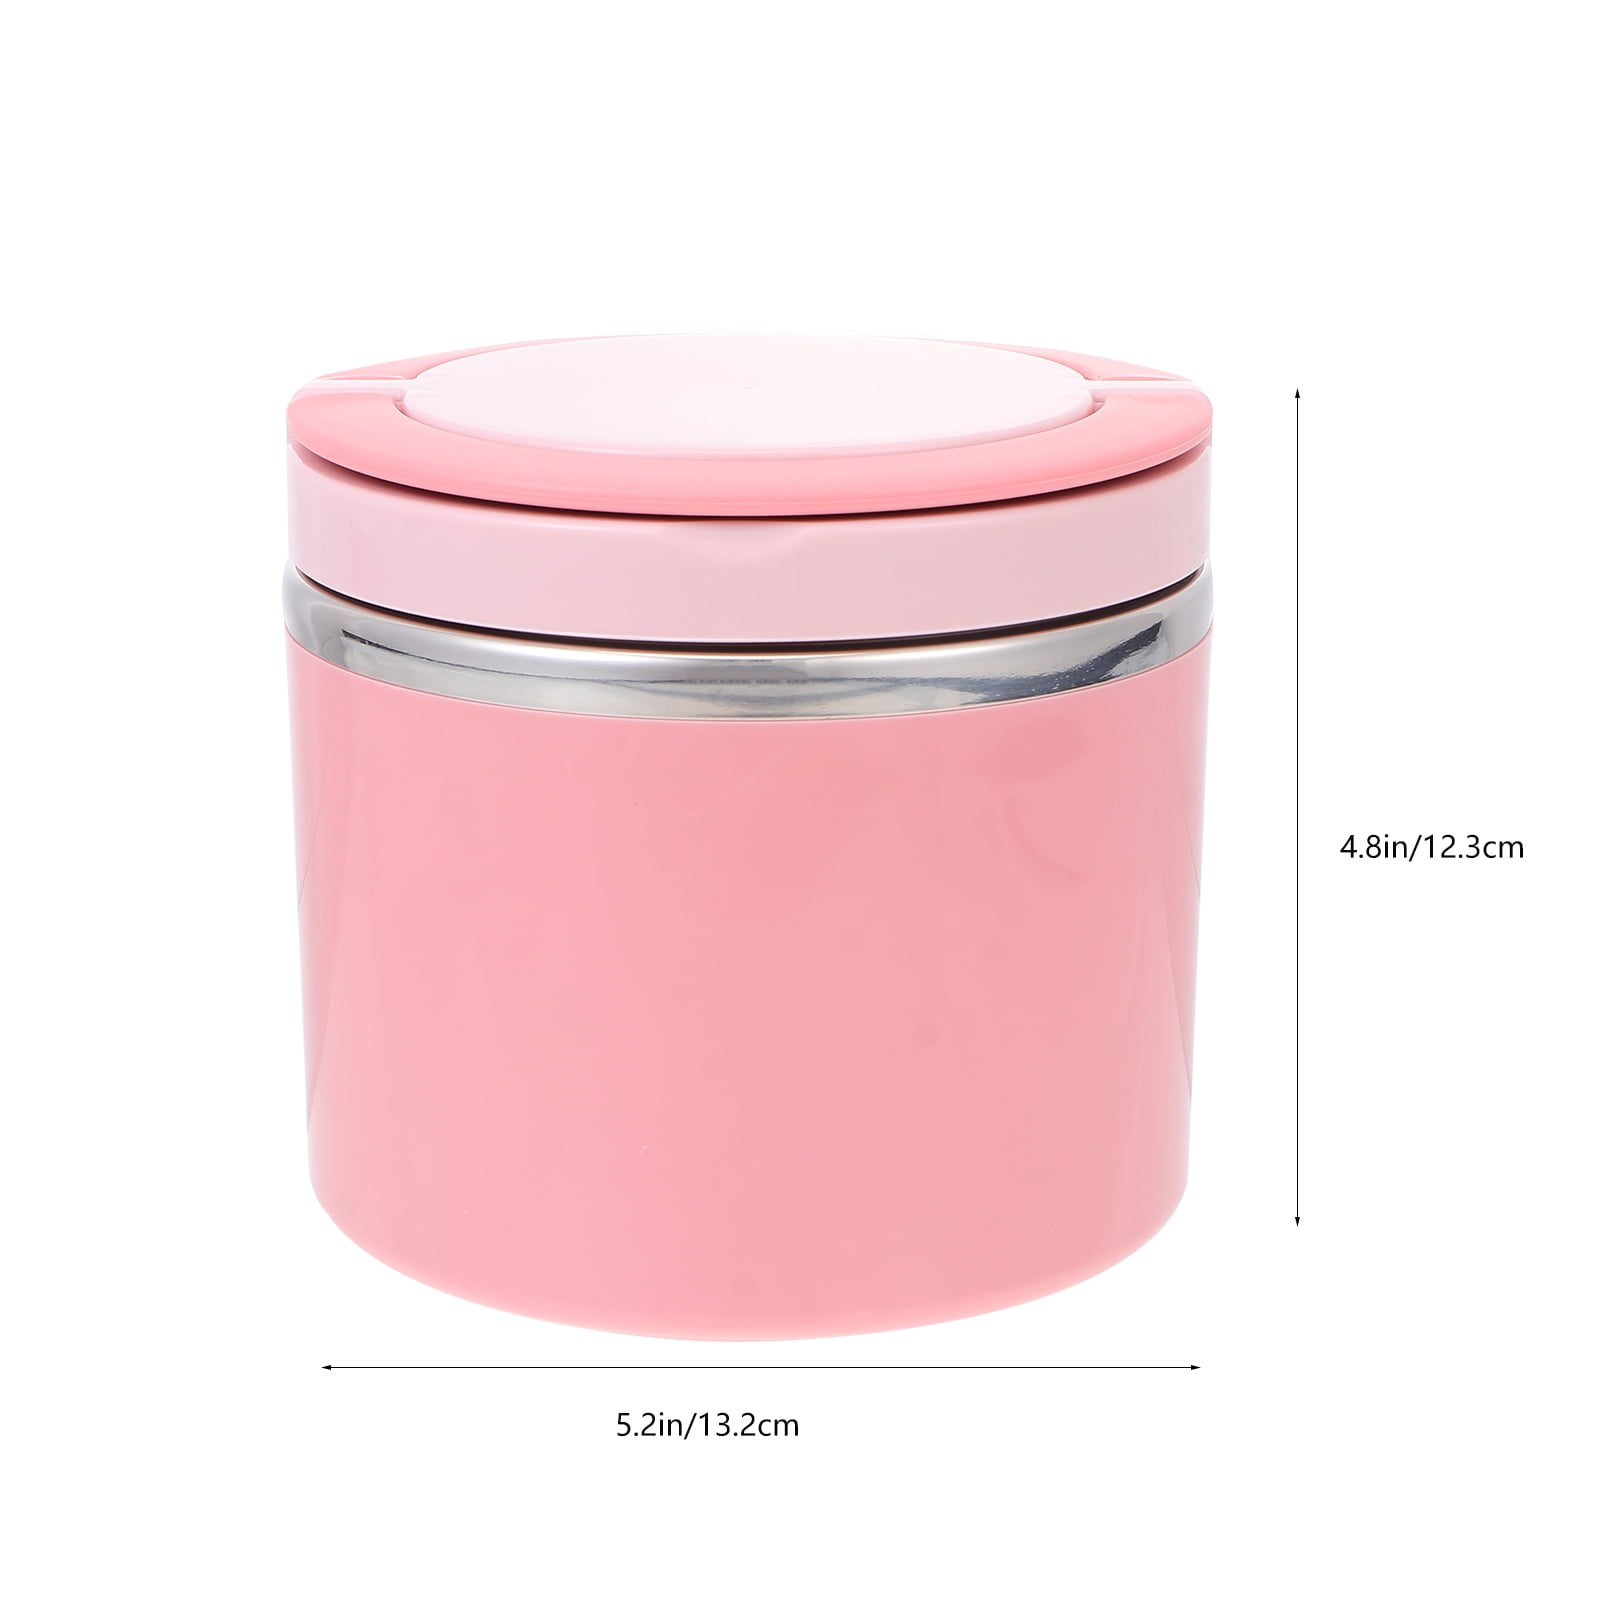 Naughtyhood Take Away Lunch Box Hot Container with Handle, 630ml Stainless Steel Food Heating Container, Food Container, Keep Warm Container